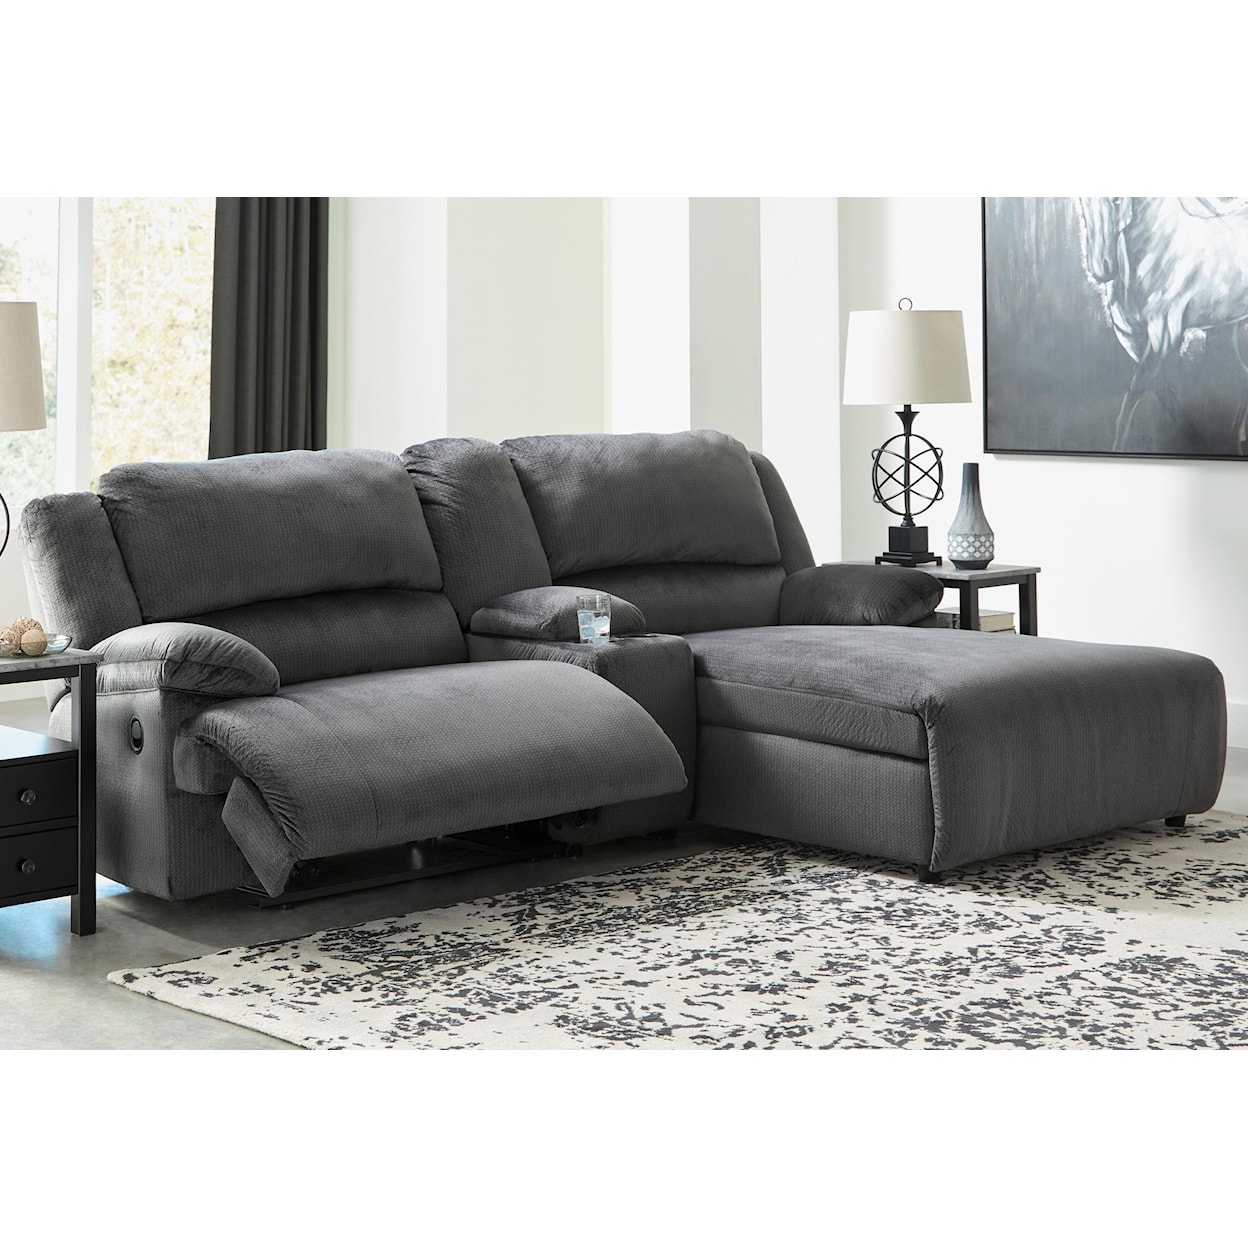 Signature Design by Ashley Clonmel Reclining Sectional w/ Chaise & Console